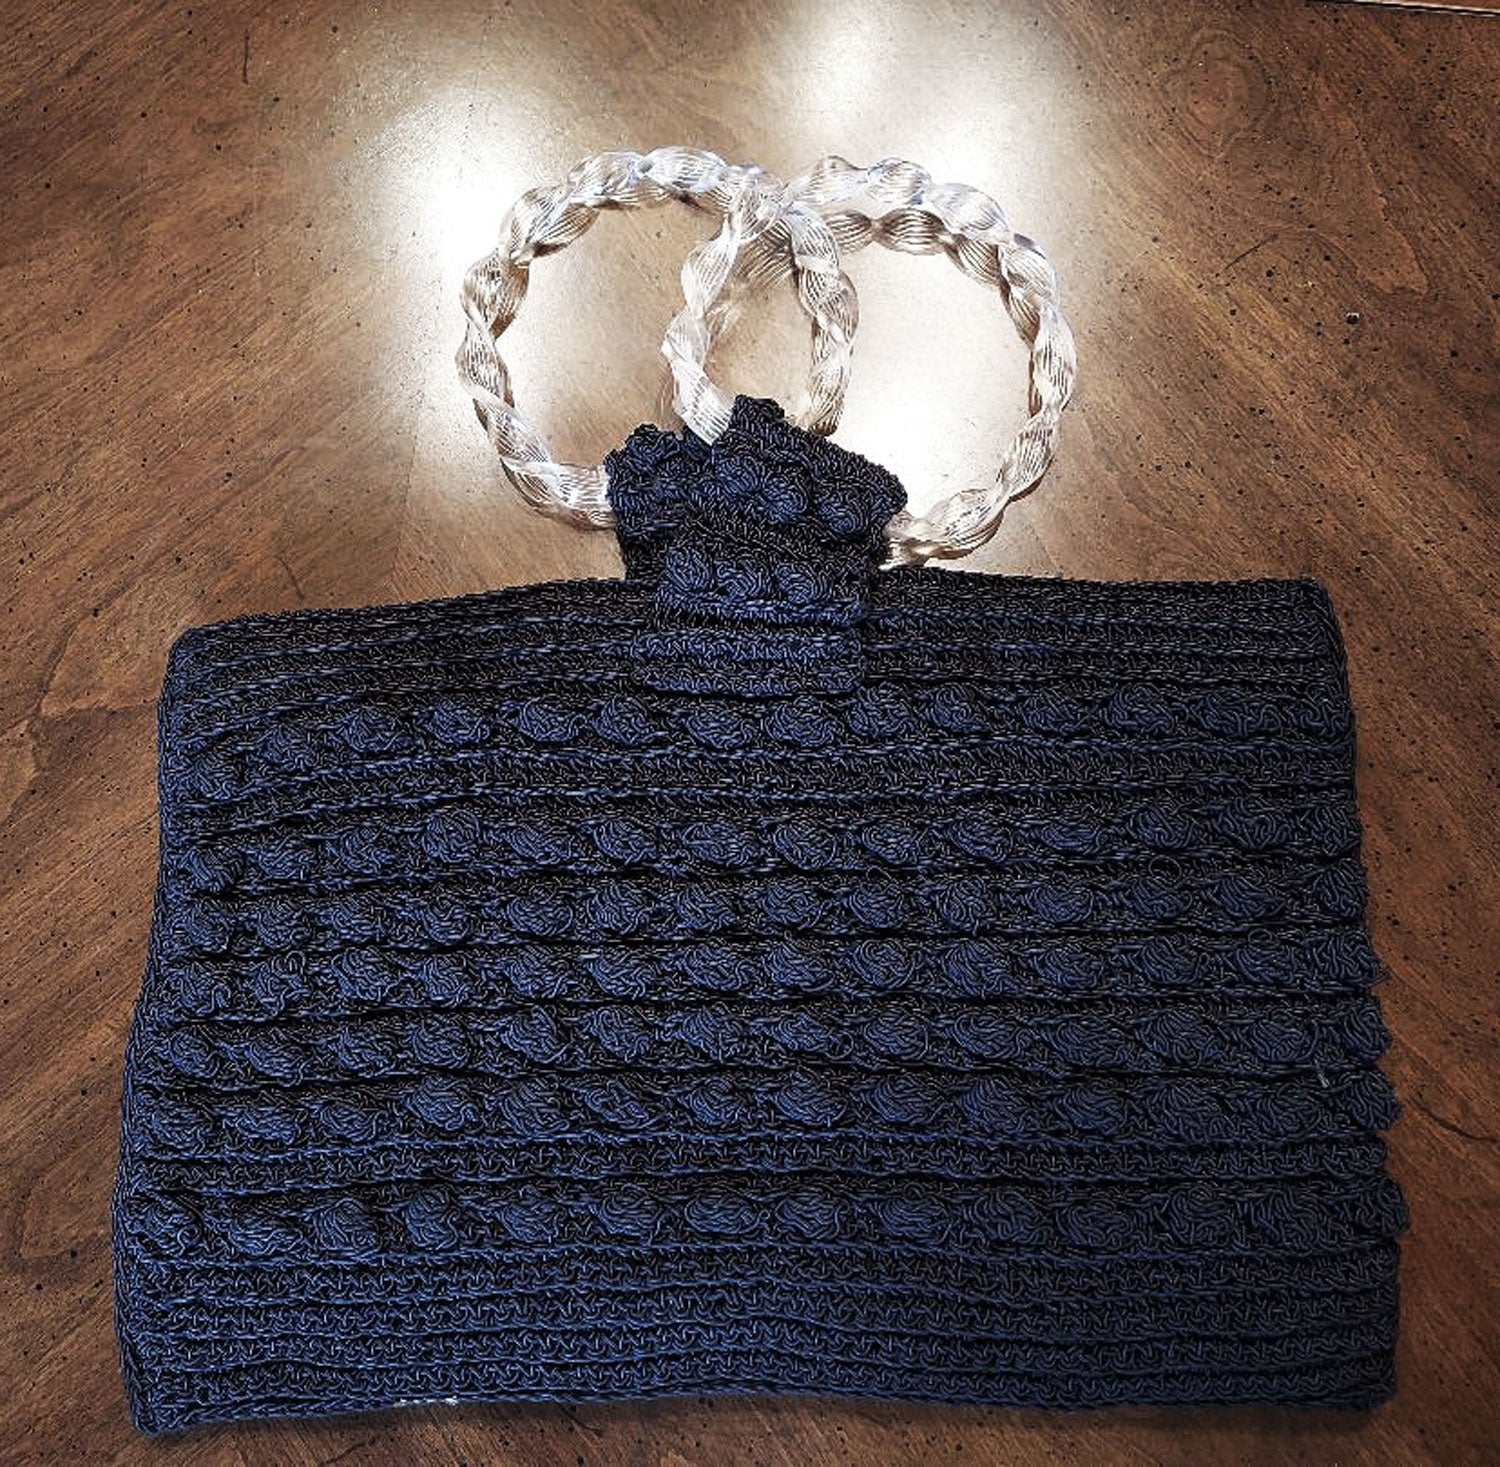 NAVY CROCHETED PURSE TWISTED ACRYLIC HANDLES3